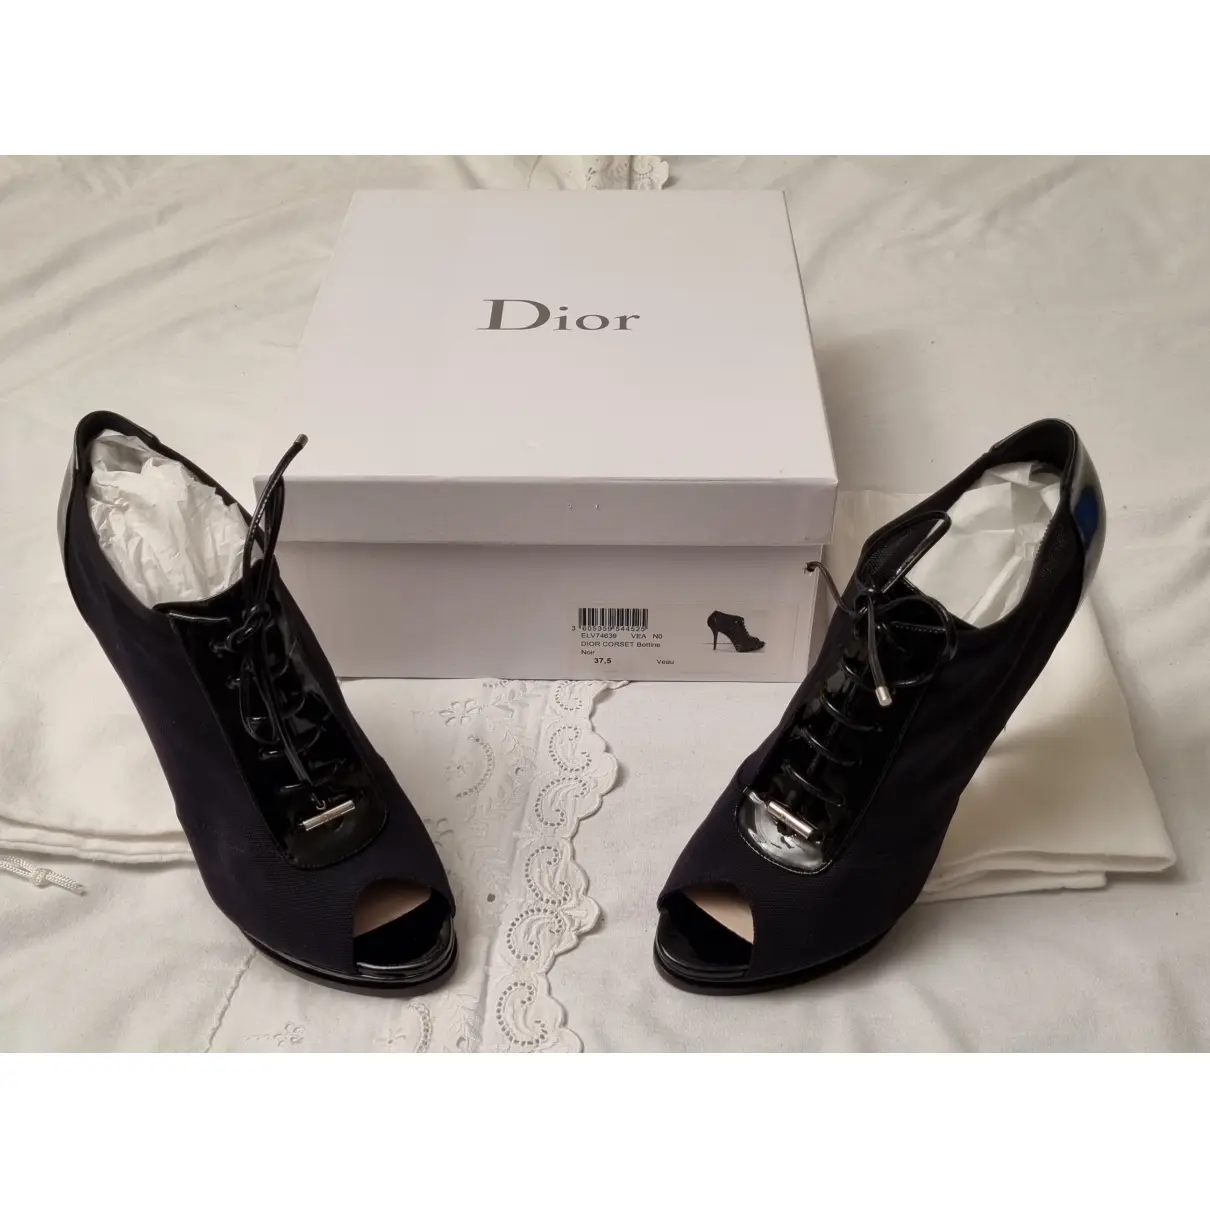 Patent leather open toe boots Dior